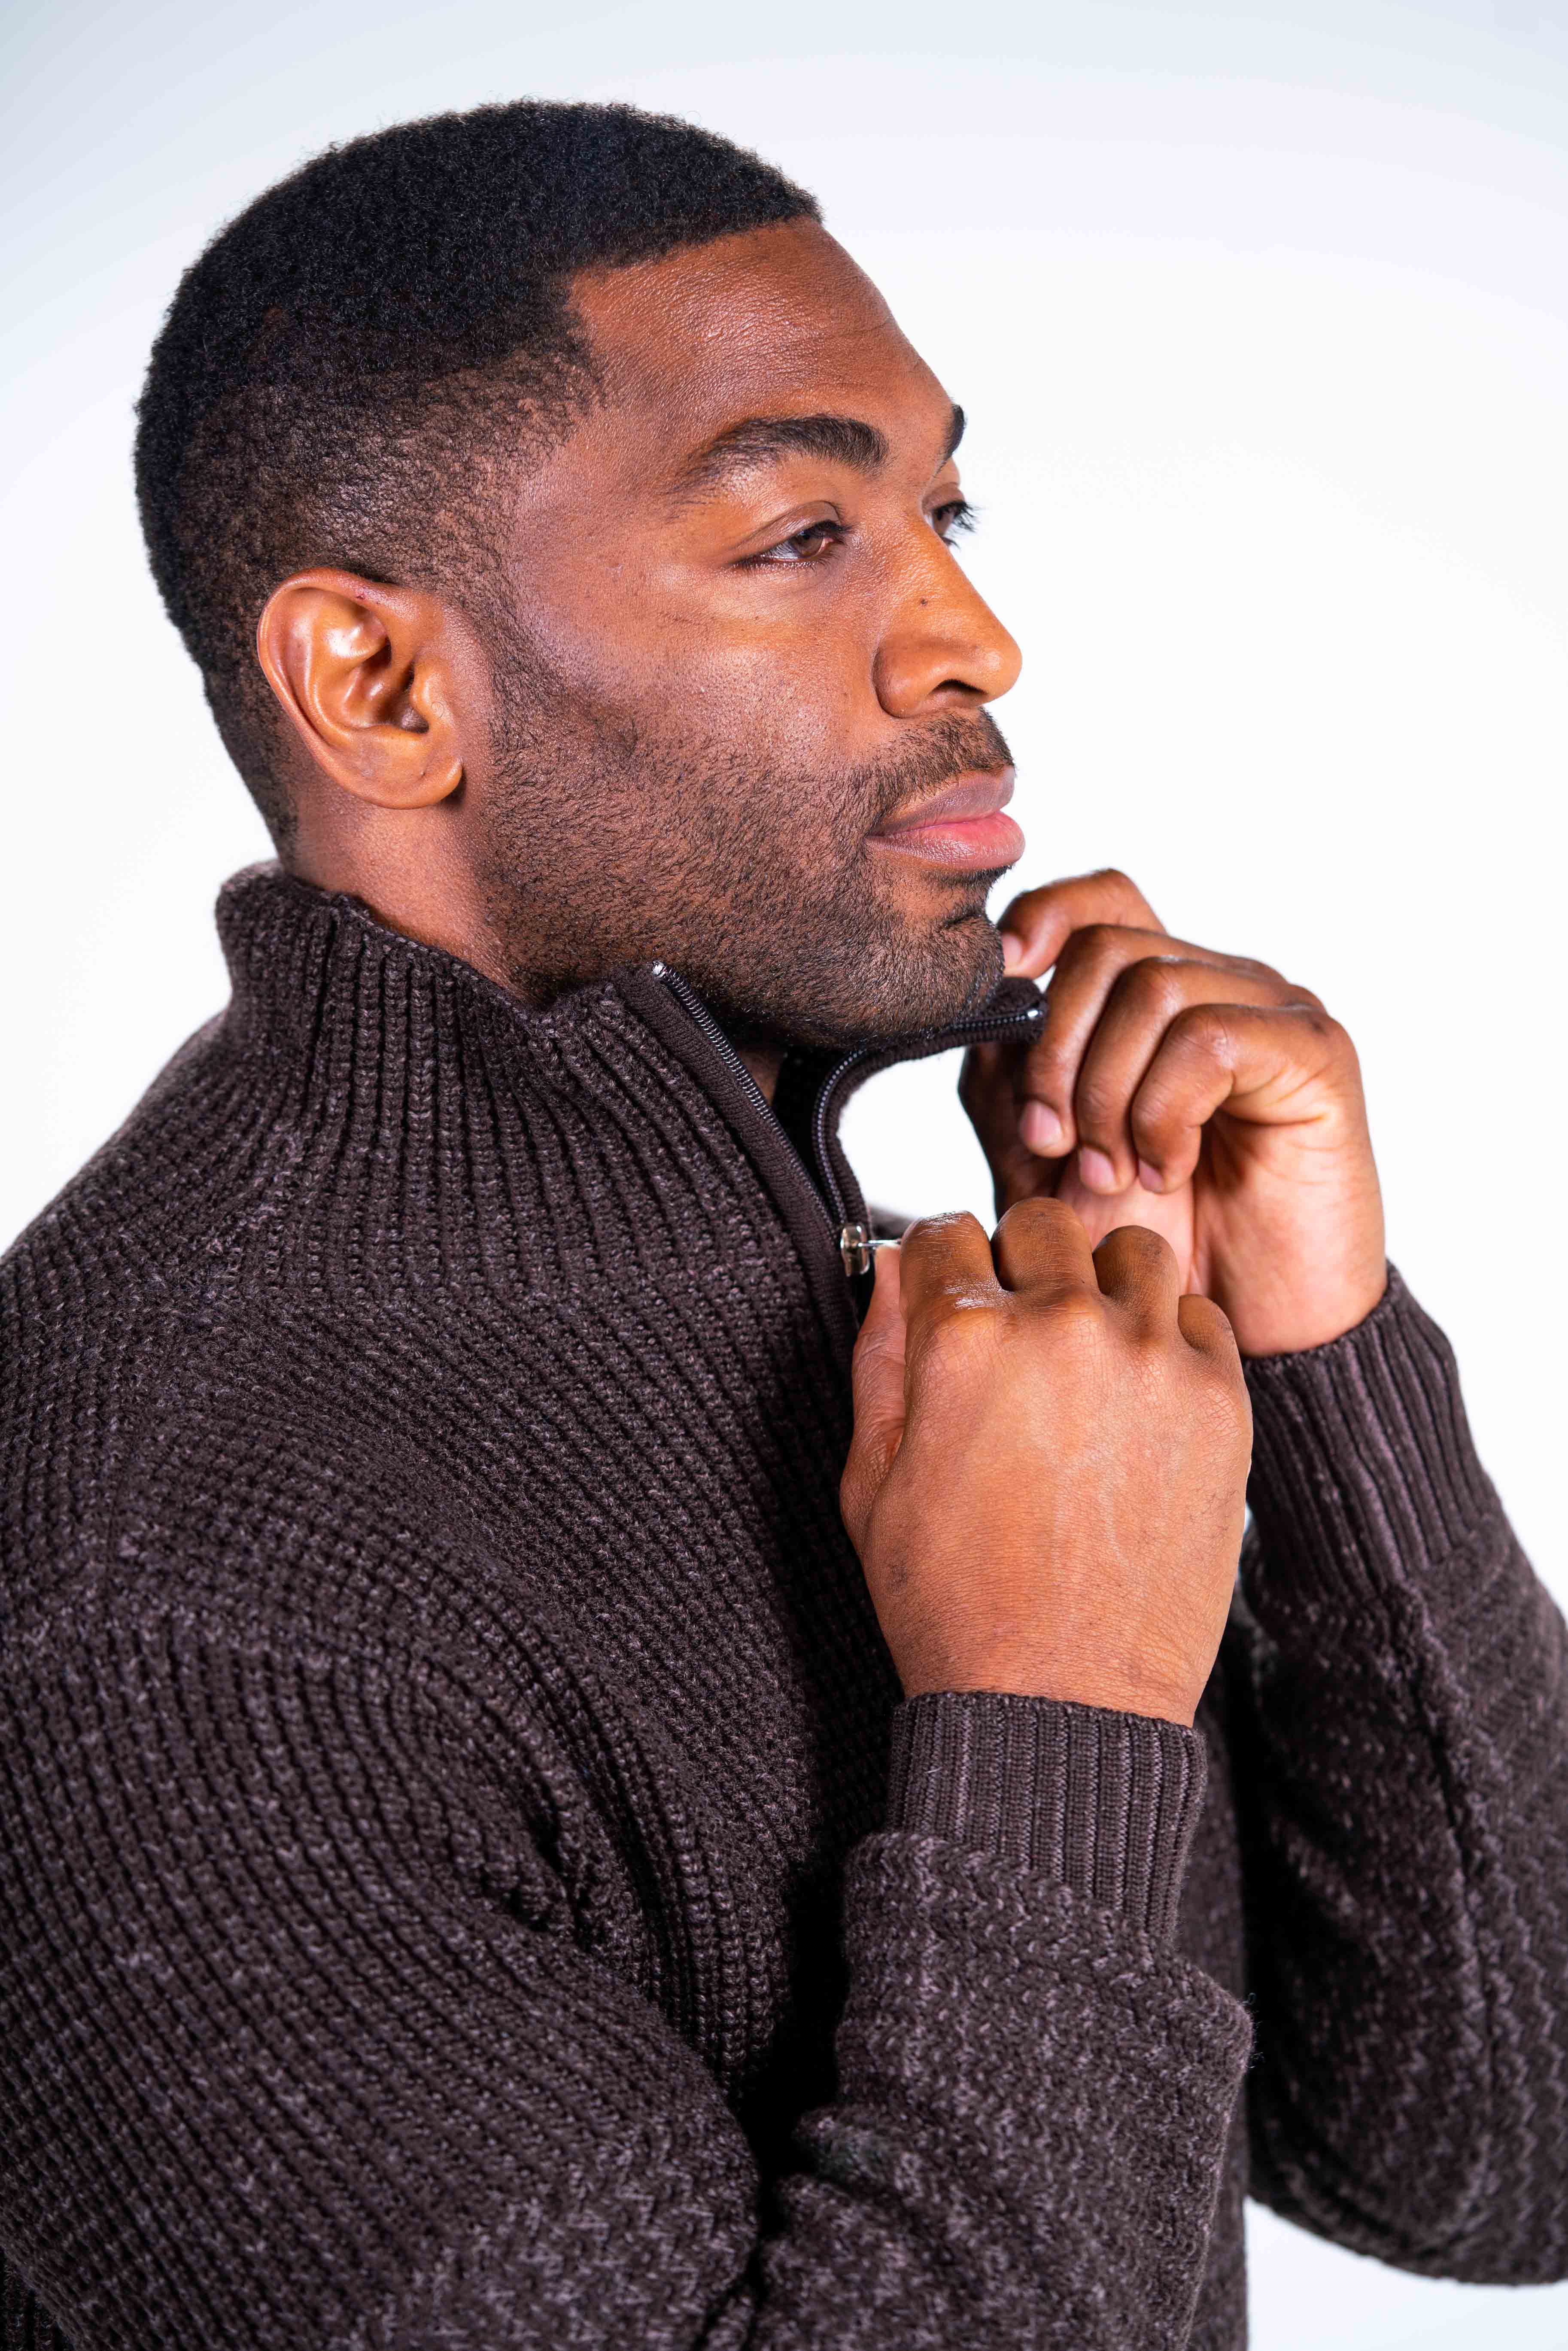 Closeup of the Sahara quarter-zip sweater showing the rib-knit sleeve ends and collar, which also is trimmed and features a silver zipper pull that cinches up the collar all the way to the top.